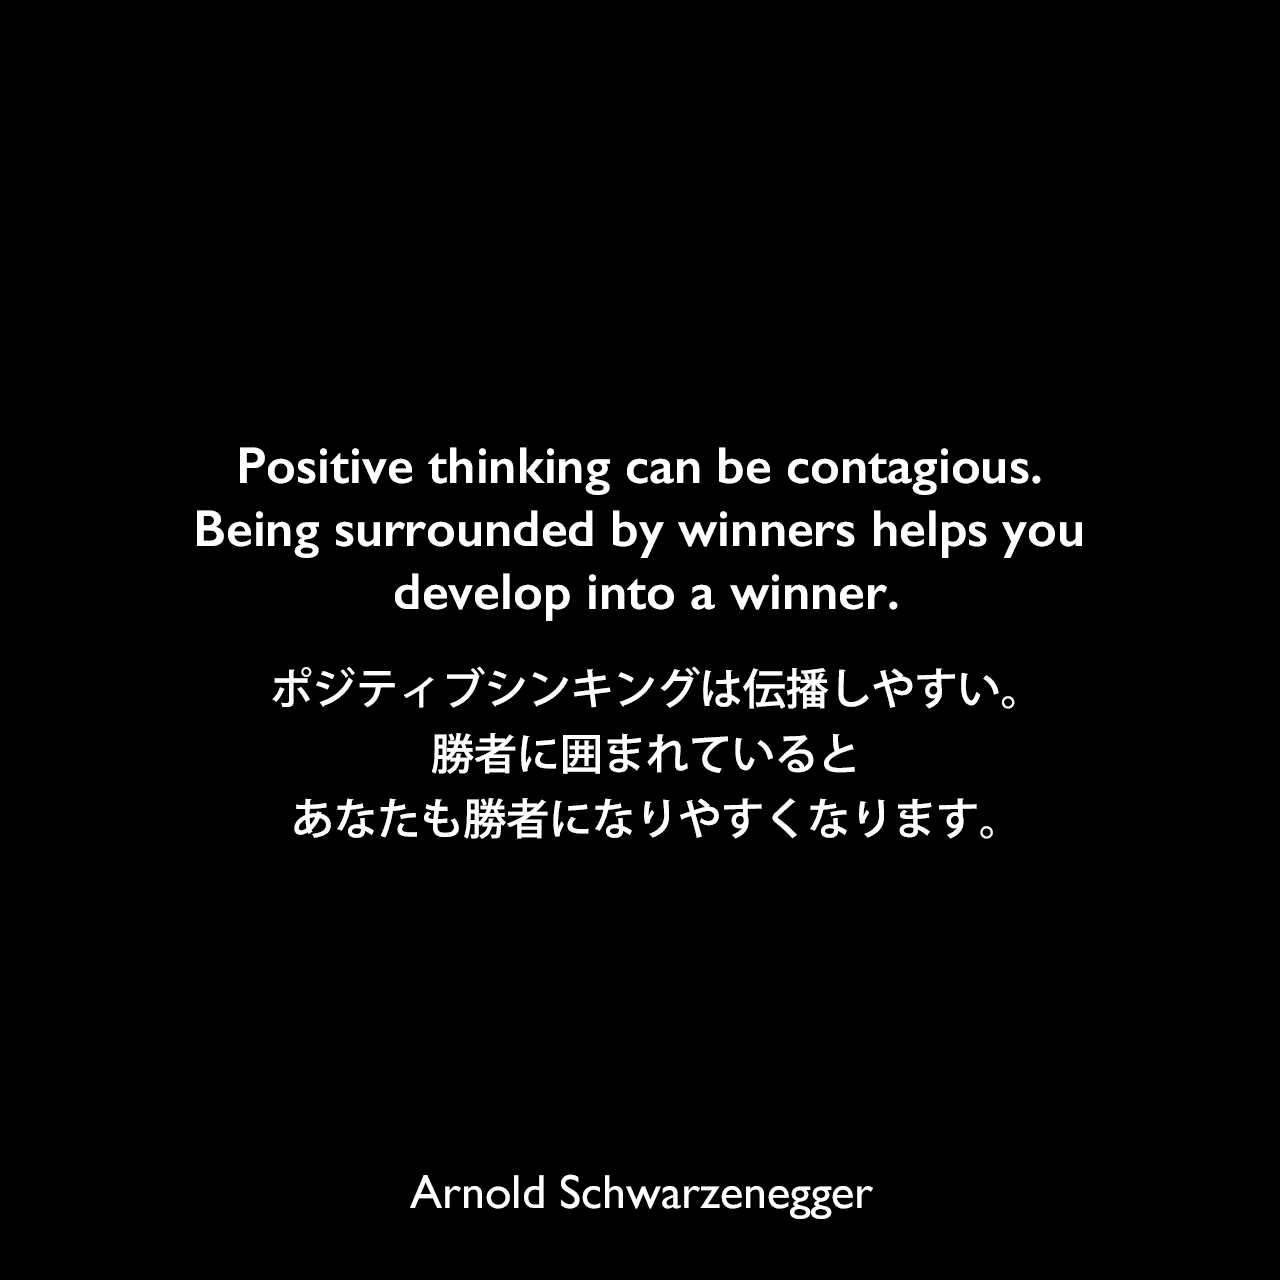 Positive thinking can be contagious. Being surrounded by winners helps you develop into a winner.ポジティブシンキングは伝播しやすい。勝者に囲まれているとあなたも勝者になりやすくなります。Arnold Schwarzenegger